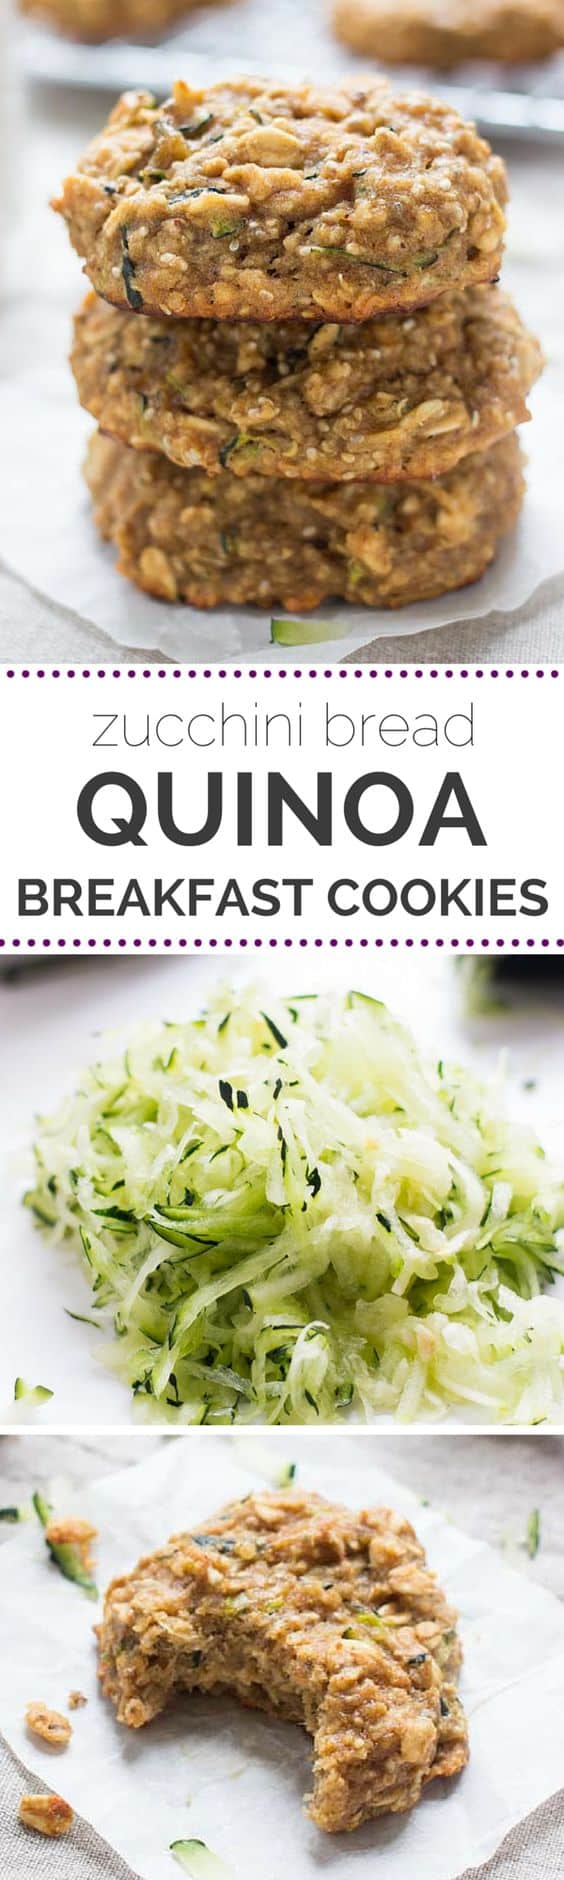 Breakfast cookies made with QUINOA that taste like zucchini bread! They're seriously amazing and come together using just 1 BOWL and a few simple ingredients. (gluten-free)